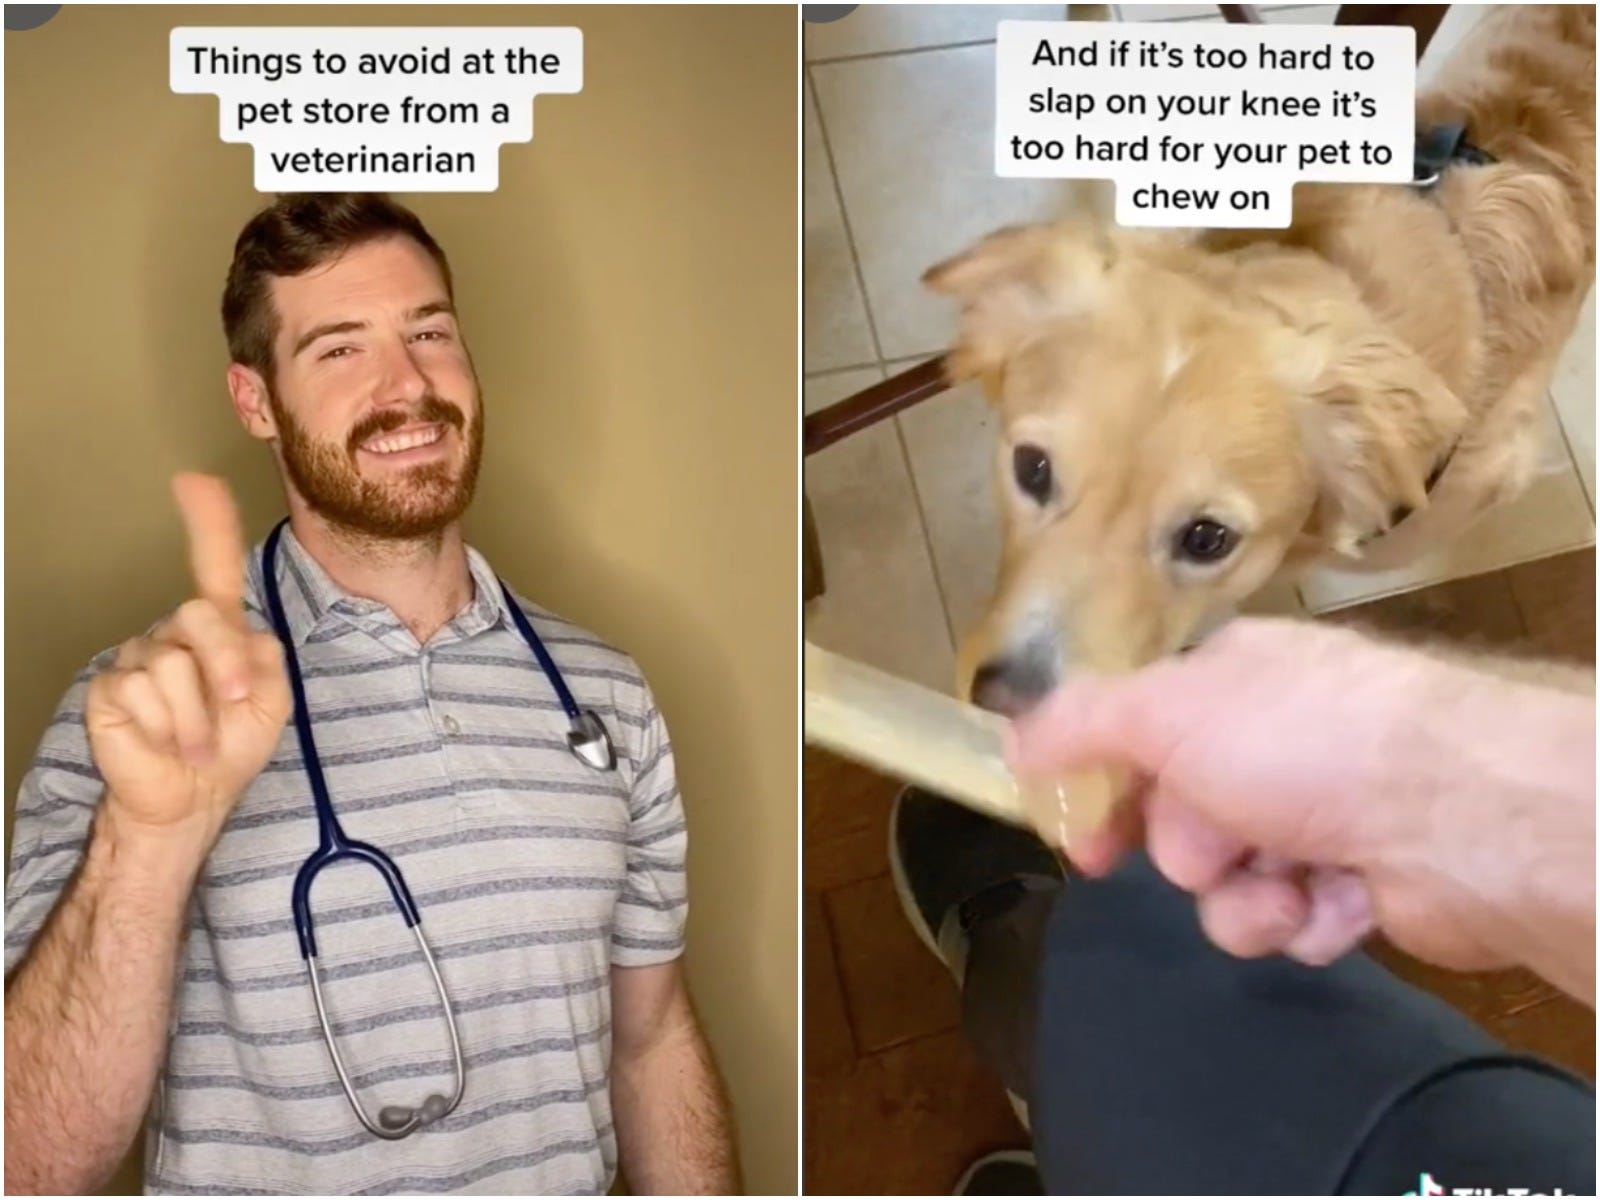 Dr. Hunter Finn's helpful pet-care tips have helped him gain a huge following on TikTok.